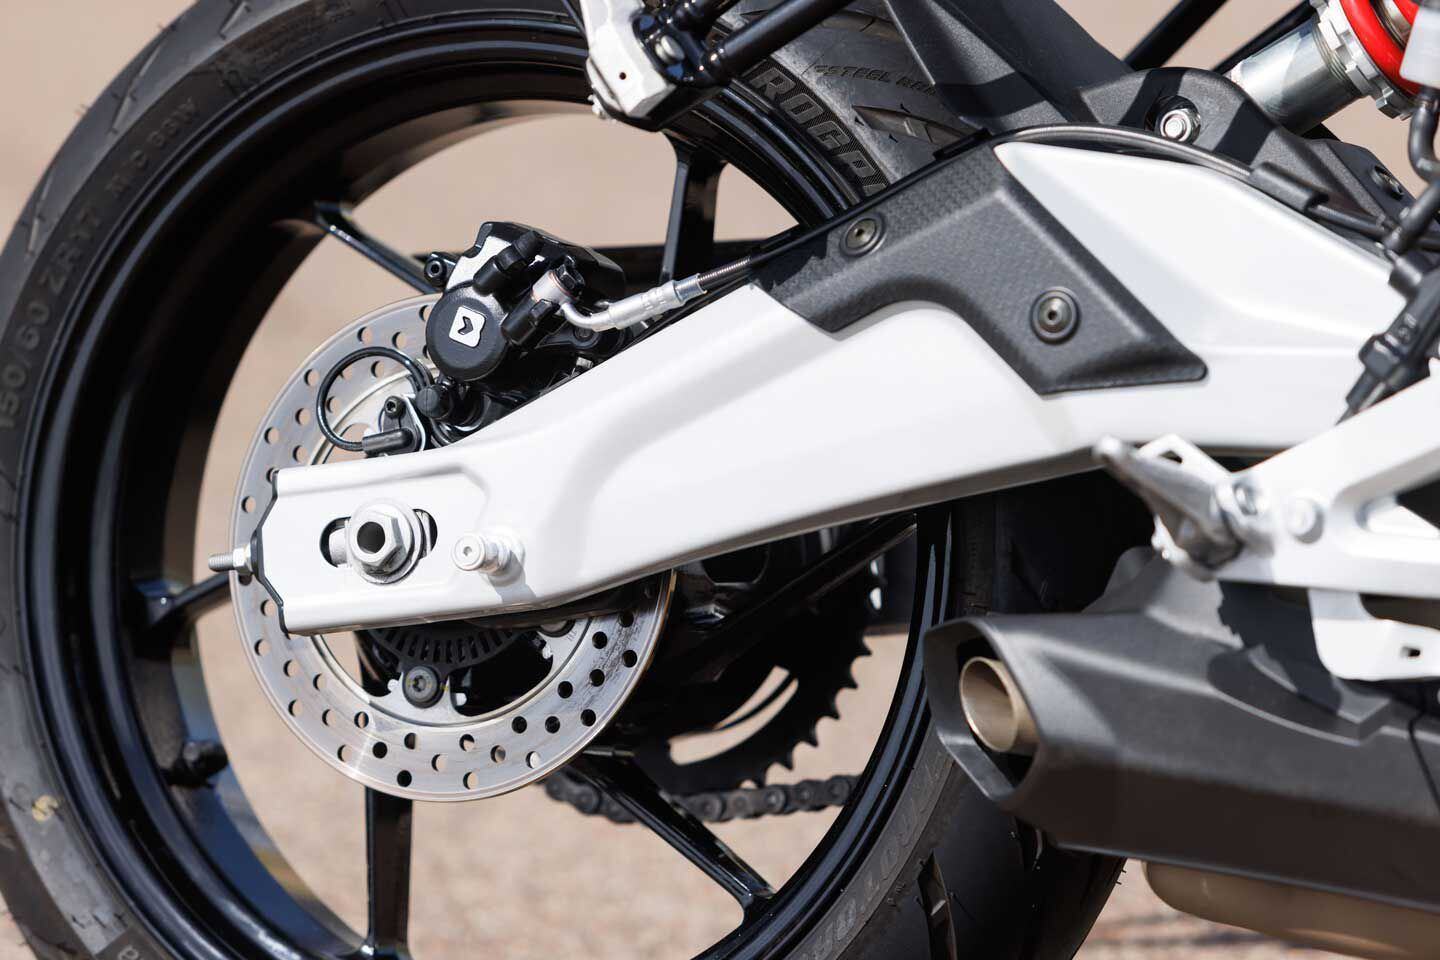 The steel swingarm mounts directly to the engine and the rear brake system utilizes a 220mm disc with a dual-piston ByBre caliper.